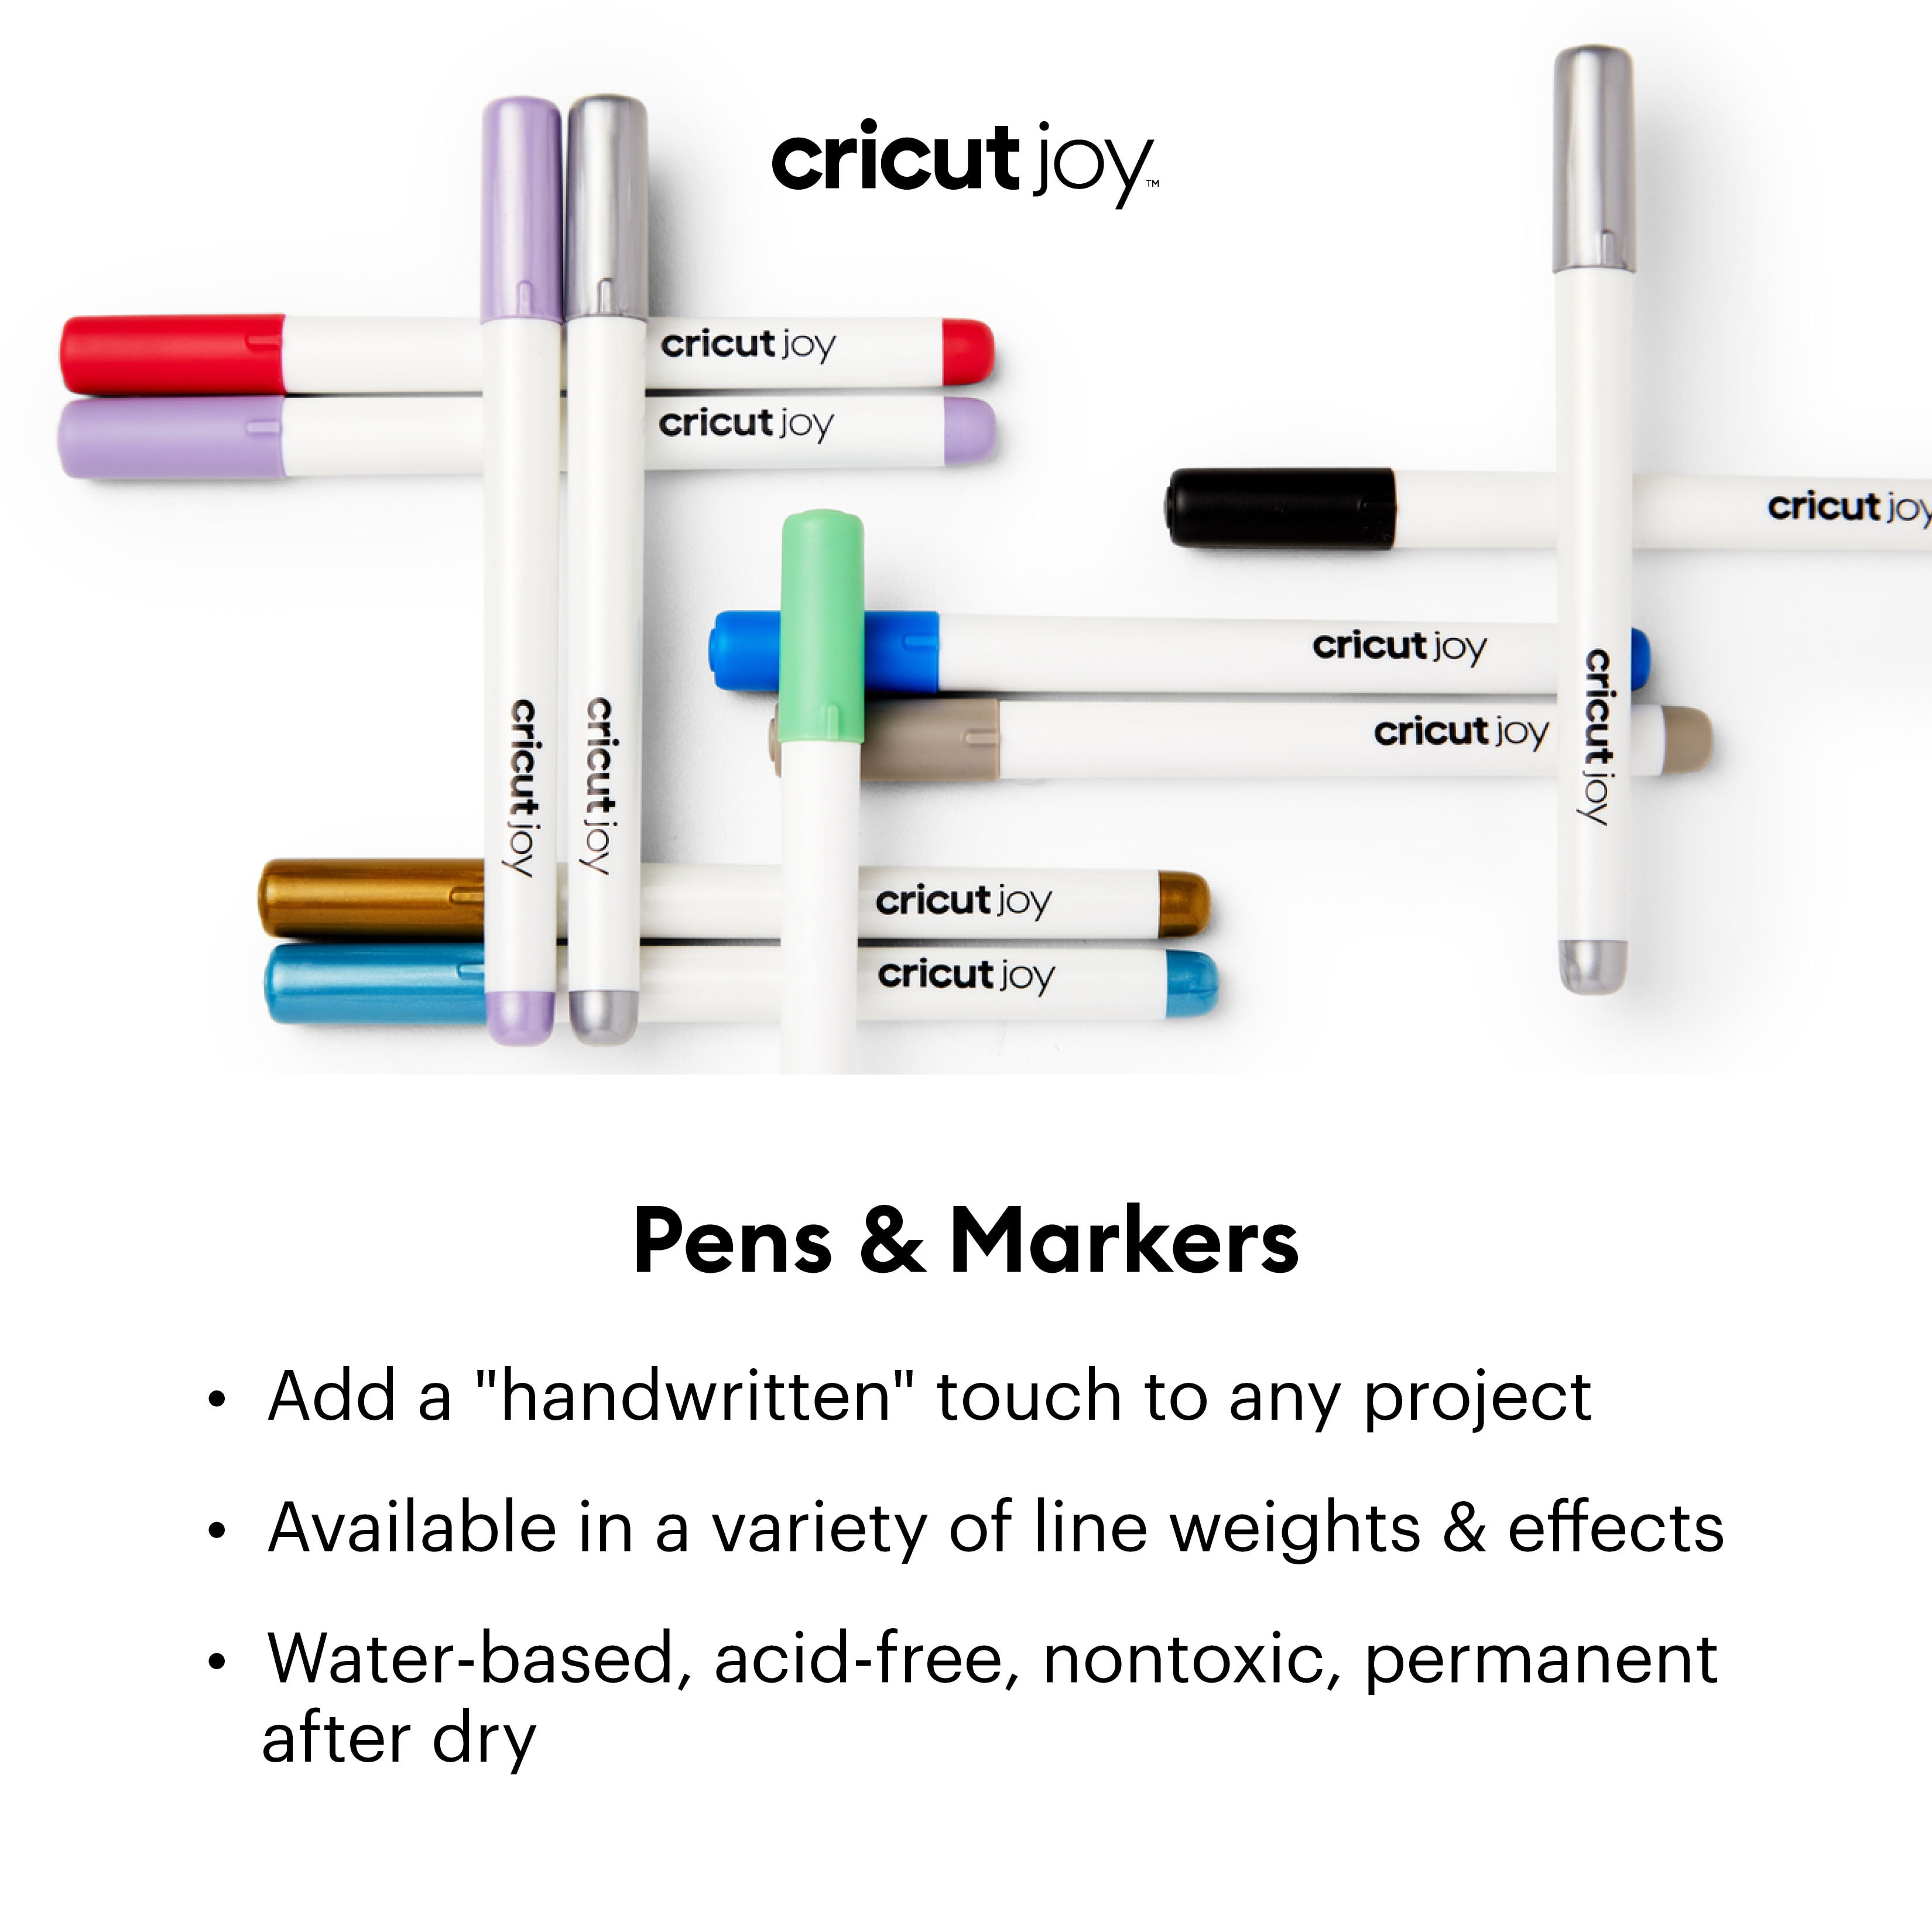 Cricut Infusible Ink Marker 1.0 Bright 5pc, 1 - Fred Meyer